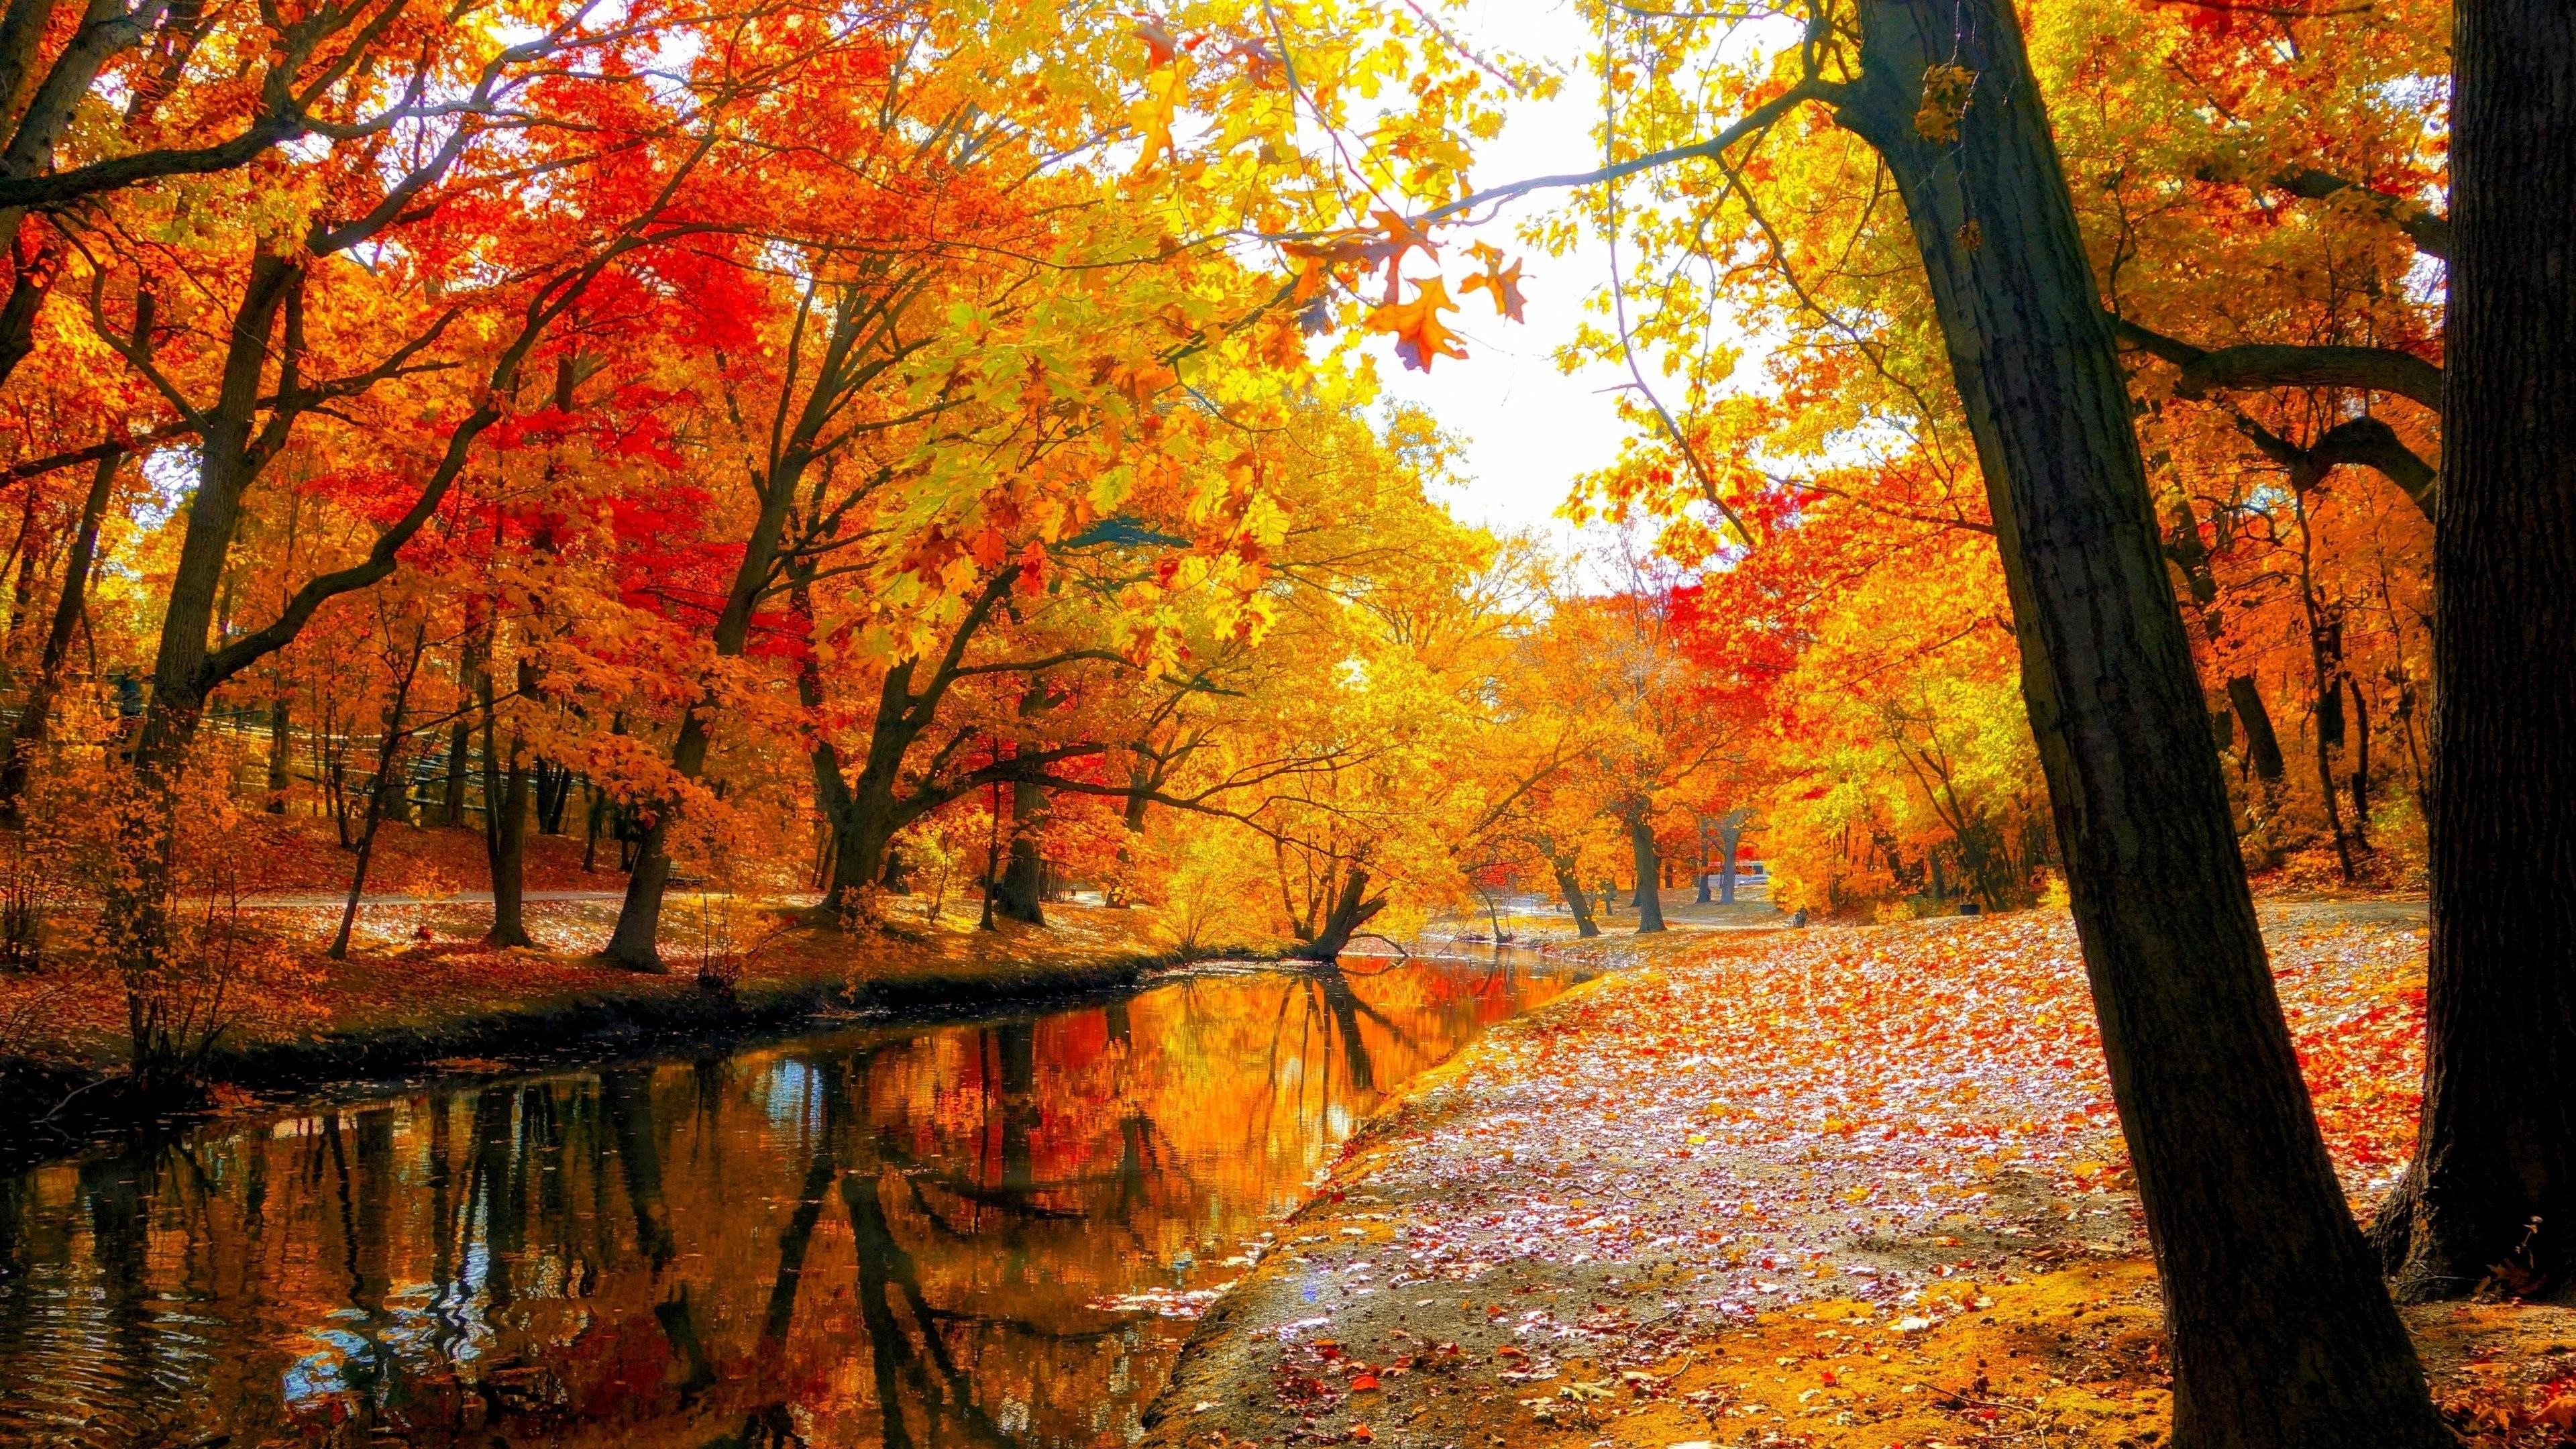 Fallen Leaves From Tree Wallpapers